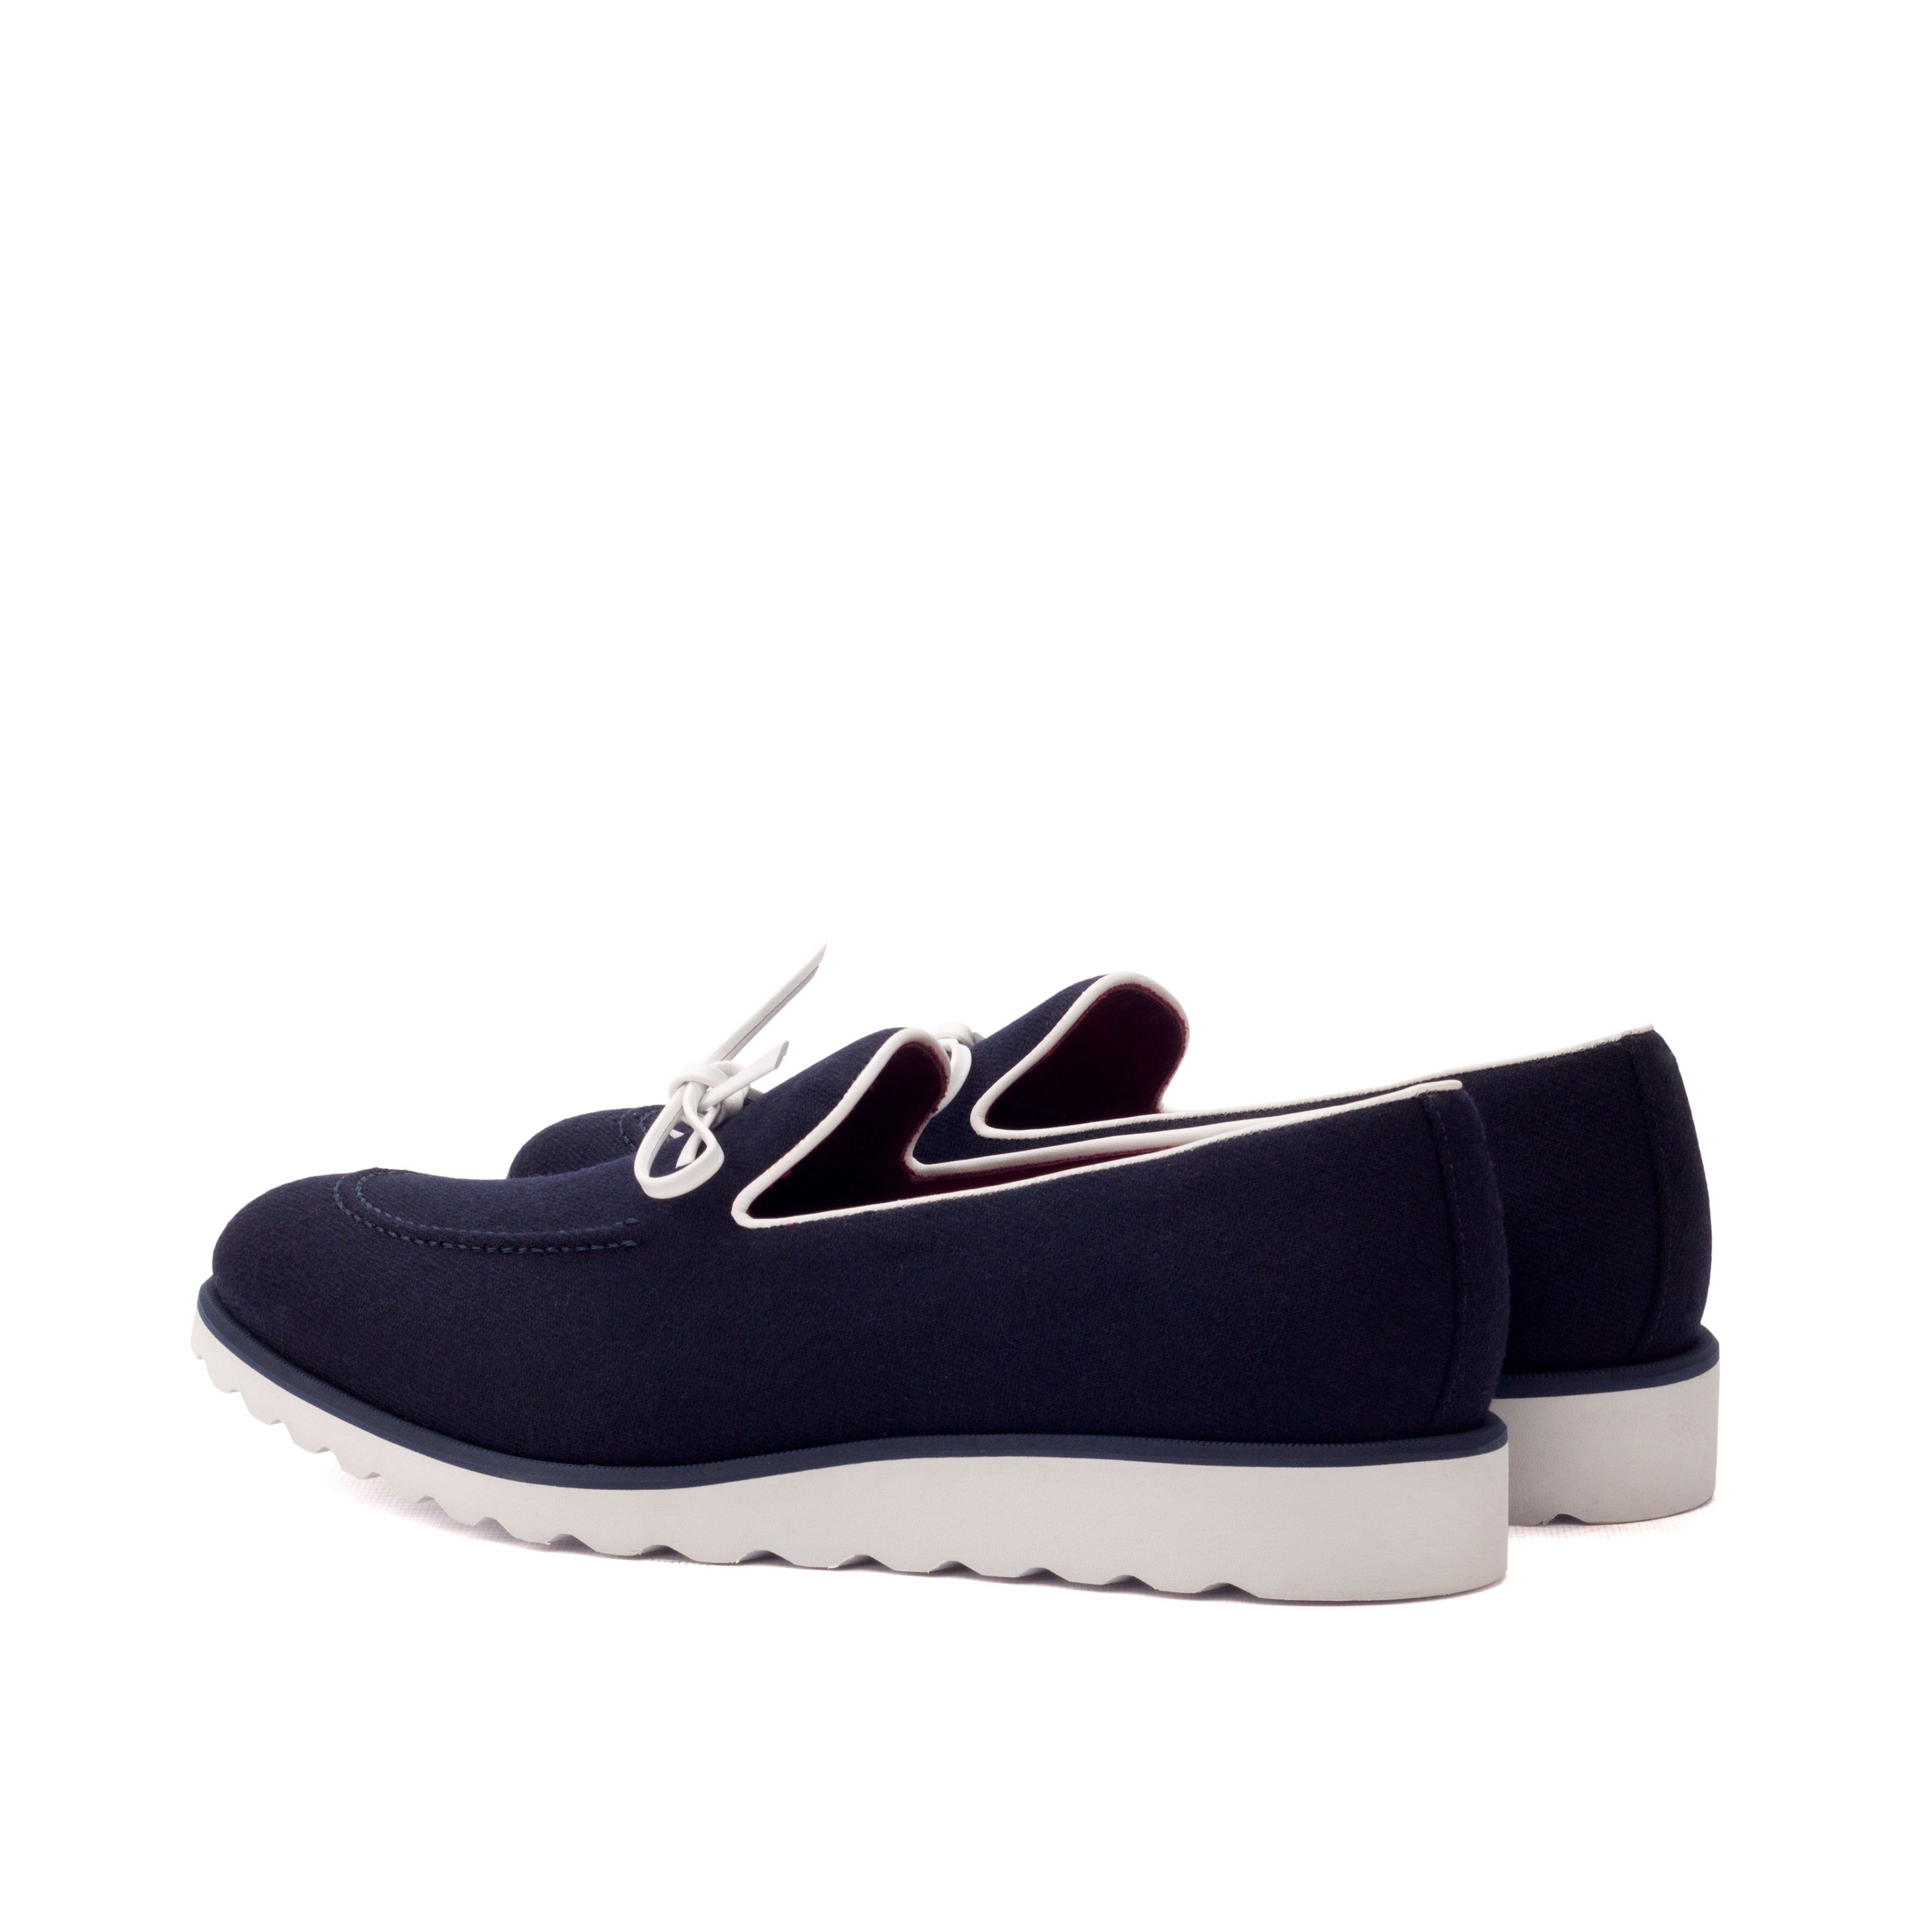 Navy Flannel Loafer with Sport Wedge Sole